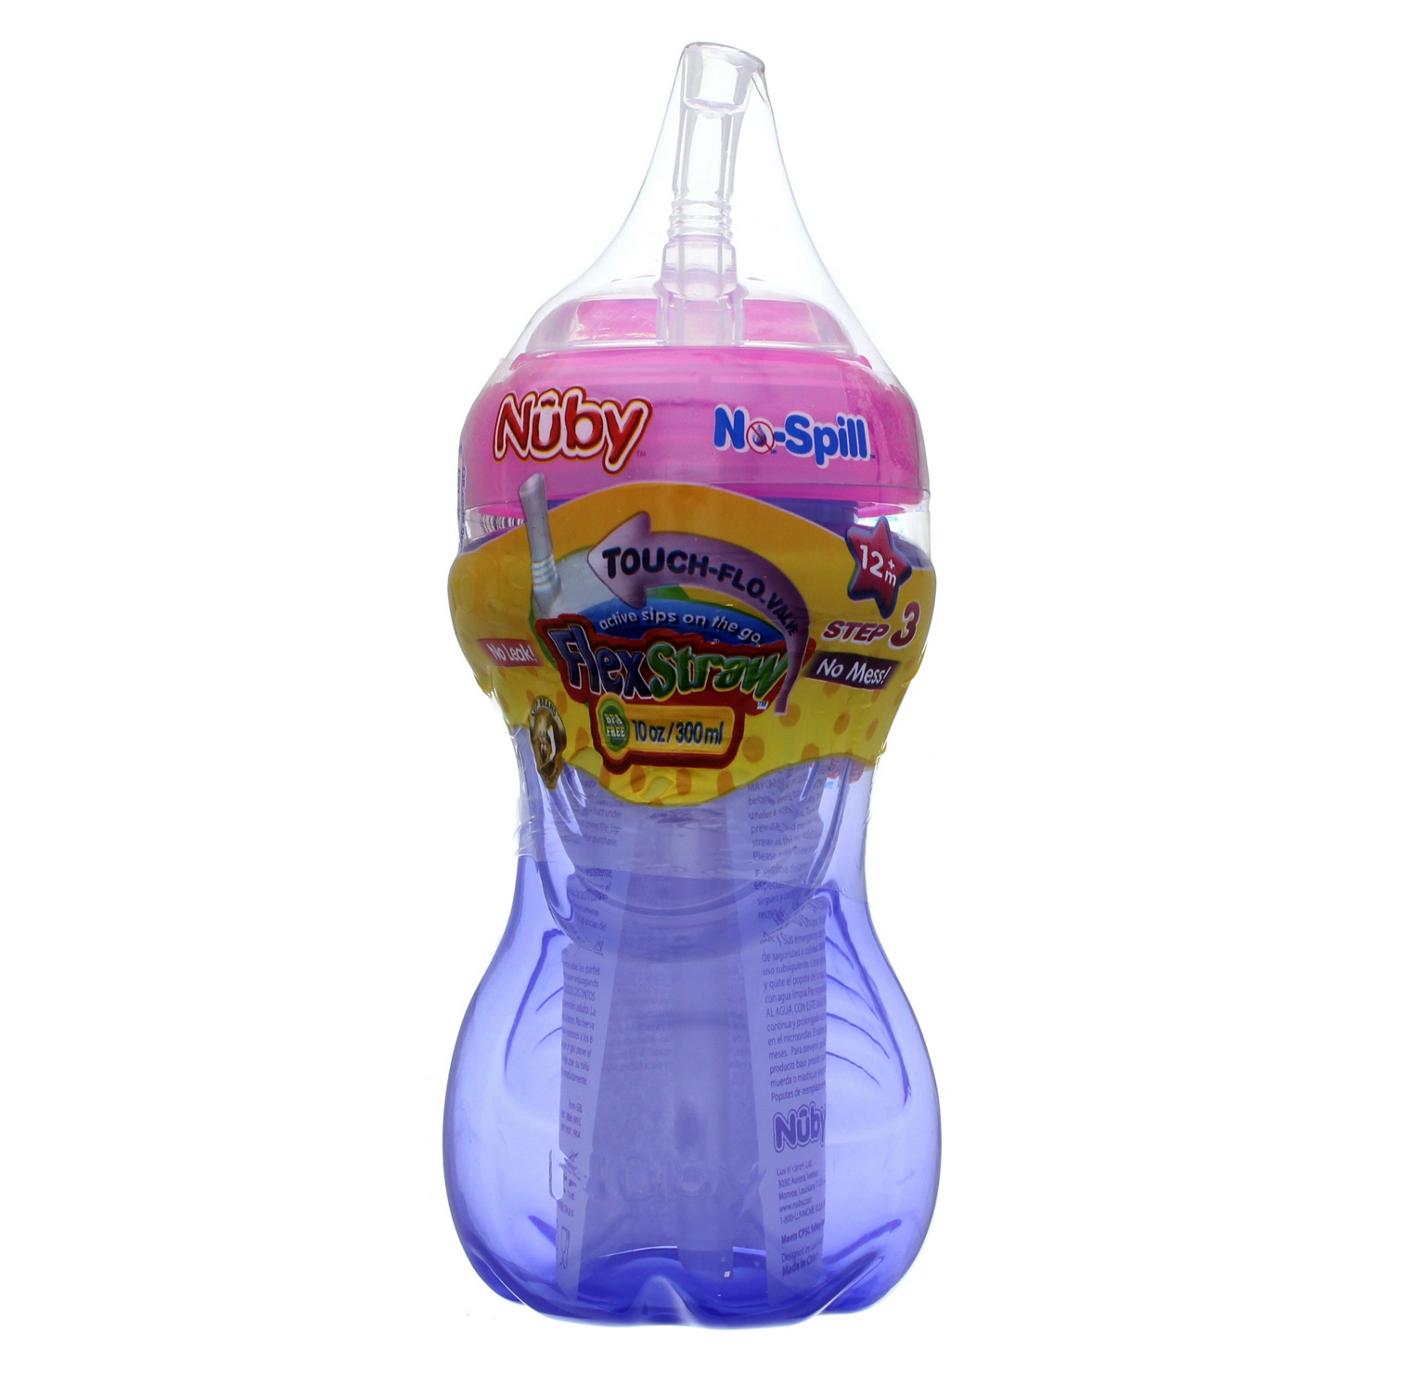 Nuby No Spill Flexi Straw 10 OZ Cup, Assorted Colors; image 5 of 5